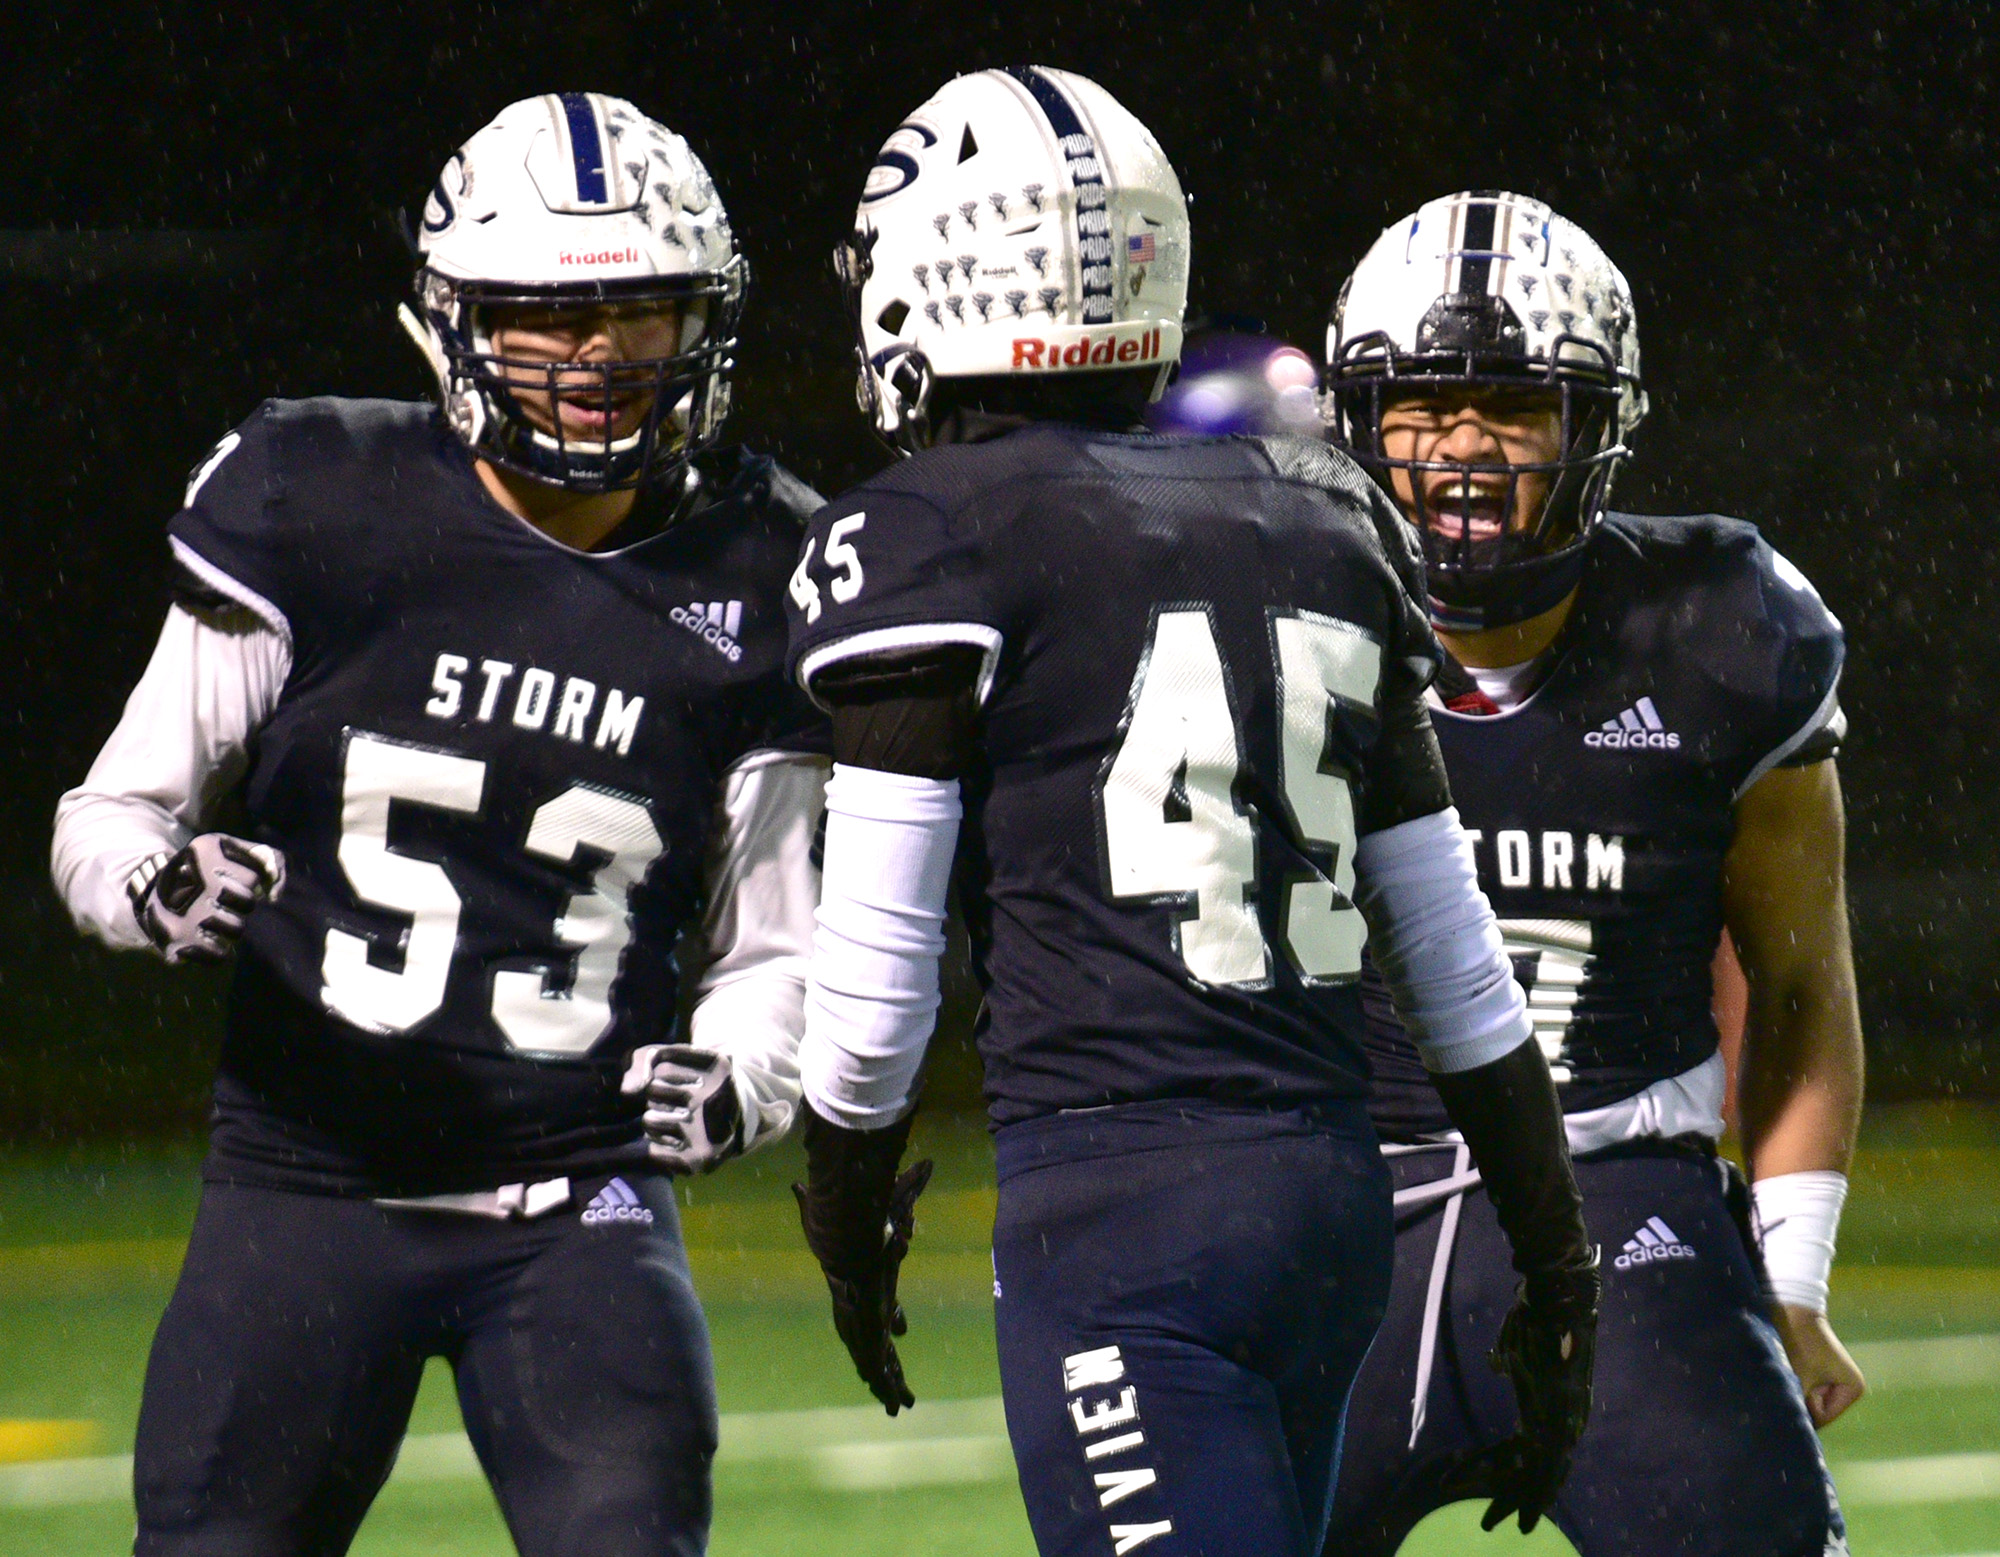 Skyview senior Alex Betancourt, left, and sophomore Hezechariah Po Ching, right, celebrate with sophomore Sam Cates after a sack Friday, Nov. 4, 2022, during the Storm’s 14-11 win against Puyallup in a 4A playoff game at Kiggins Bowl.